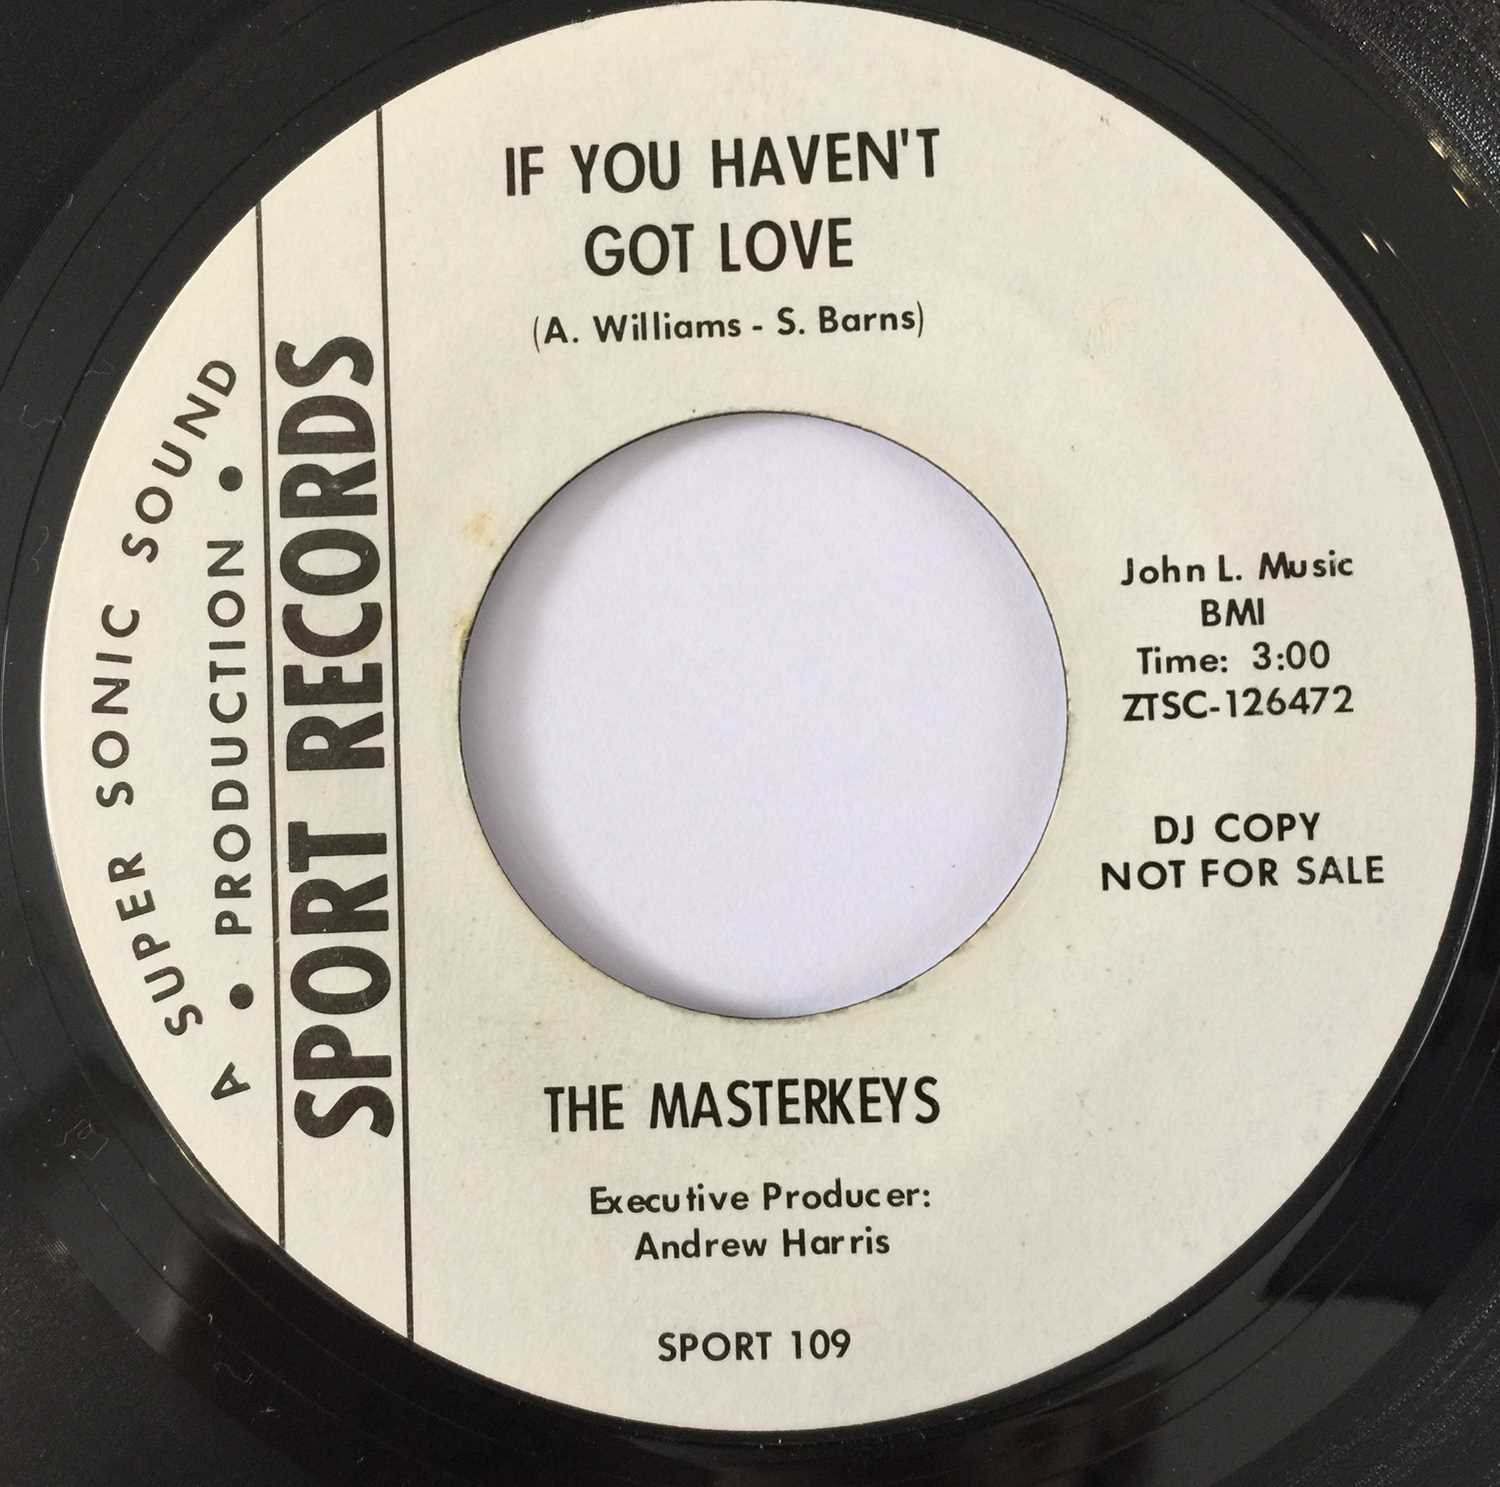 Lot 21 - THE MASTERKEYS - IF YOU HAVEN'T GOT LOVE/ WEAK AND BROKEN HEARTED 7" (US PROMO - SPORT RECORDS 109)